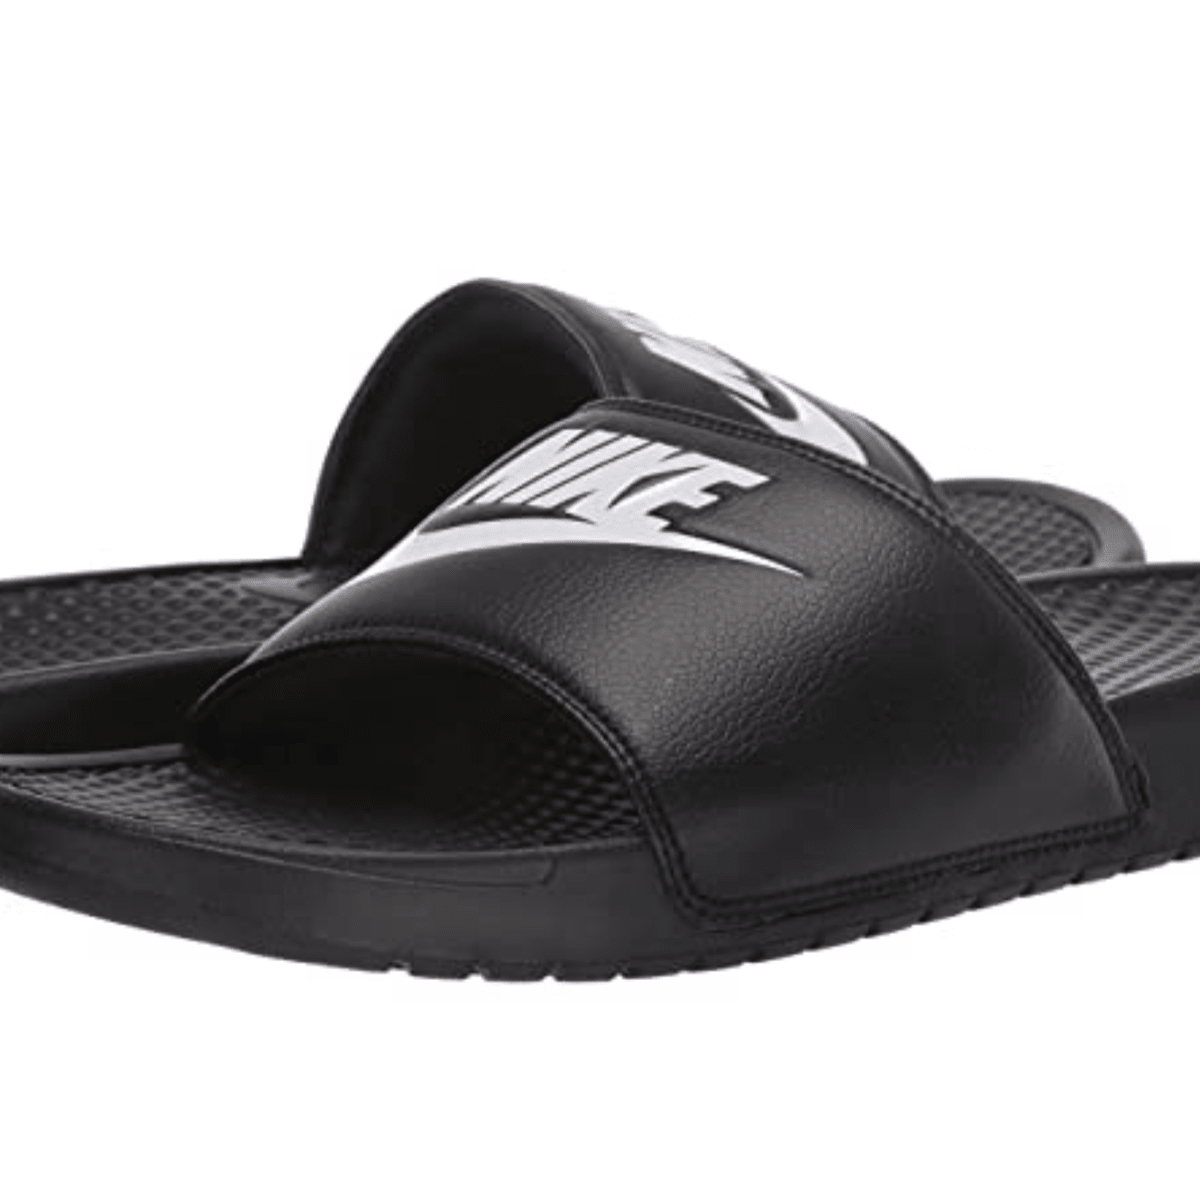 Nike Sandals On Sale From Zappos 